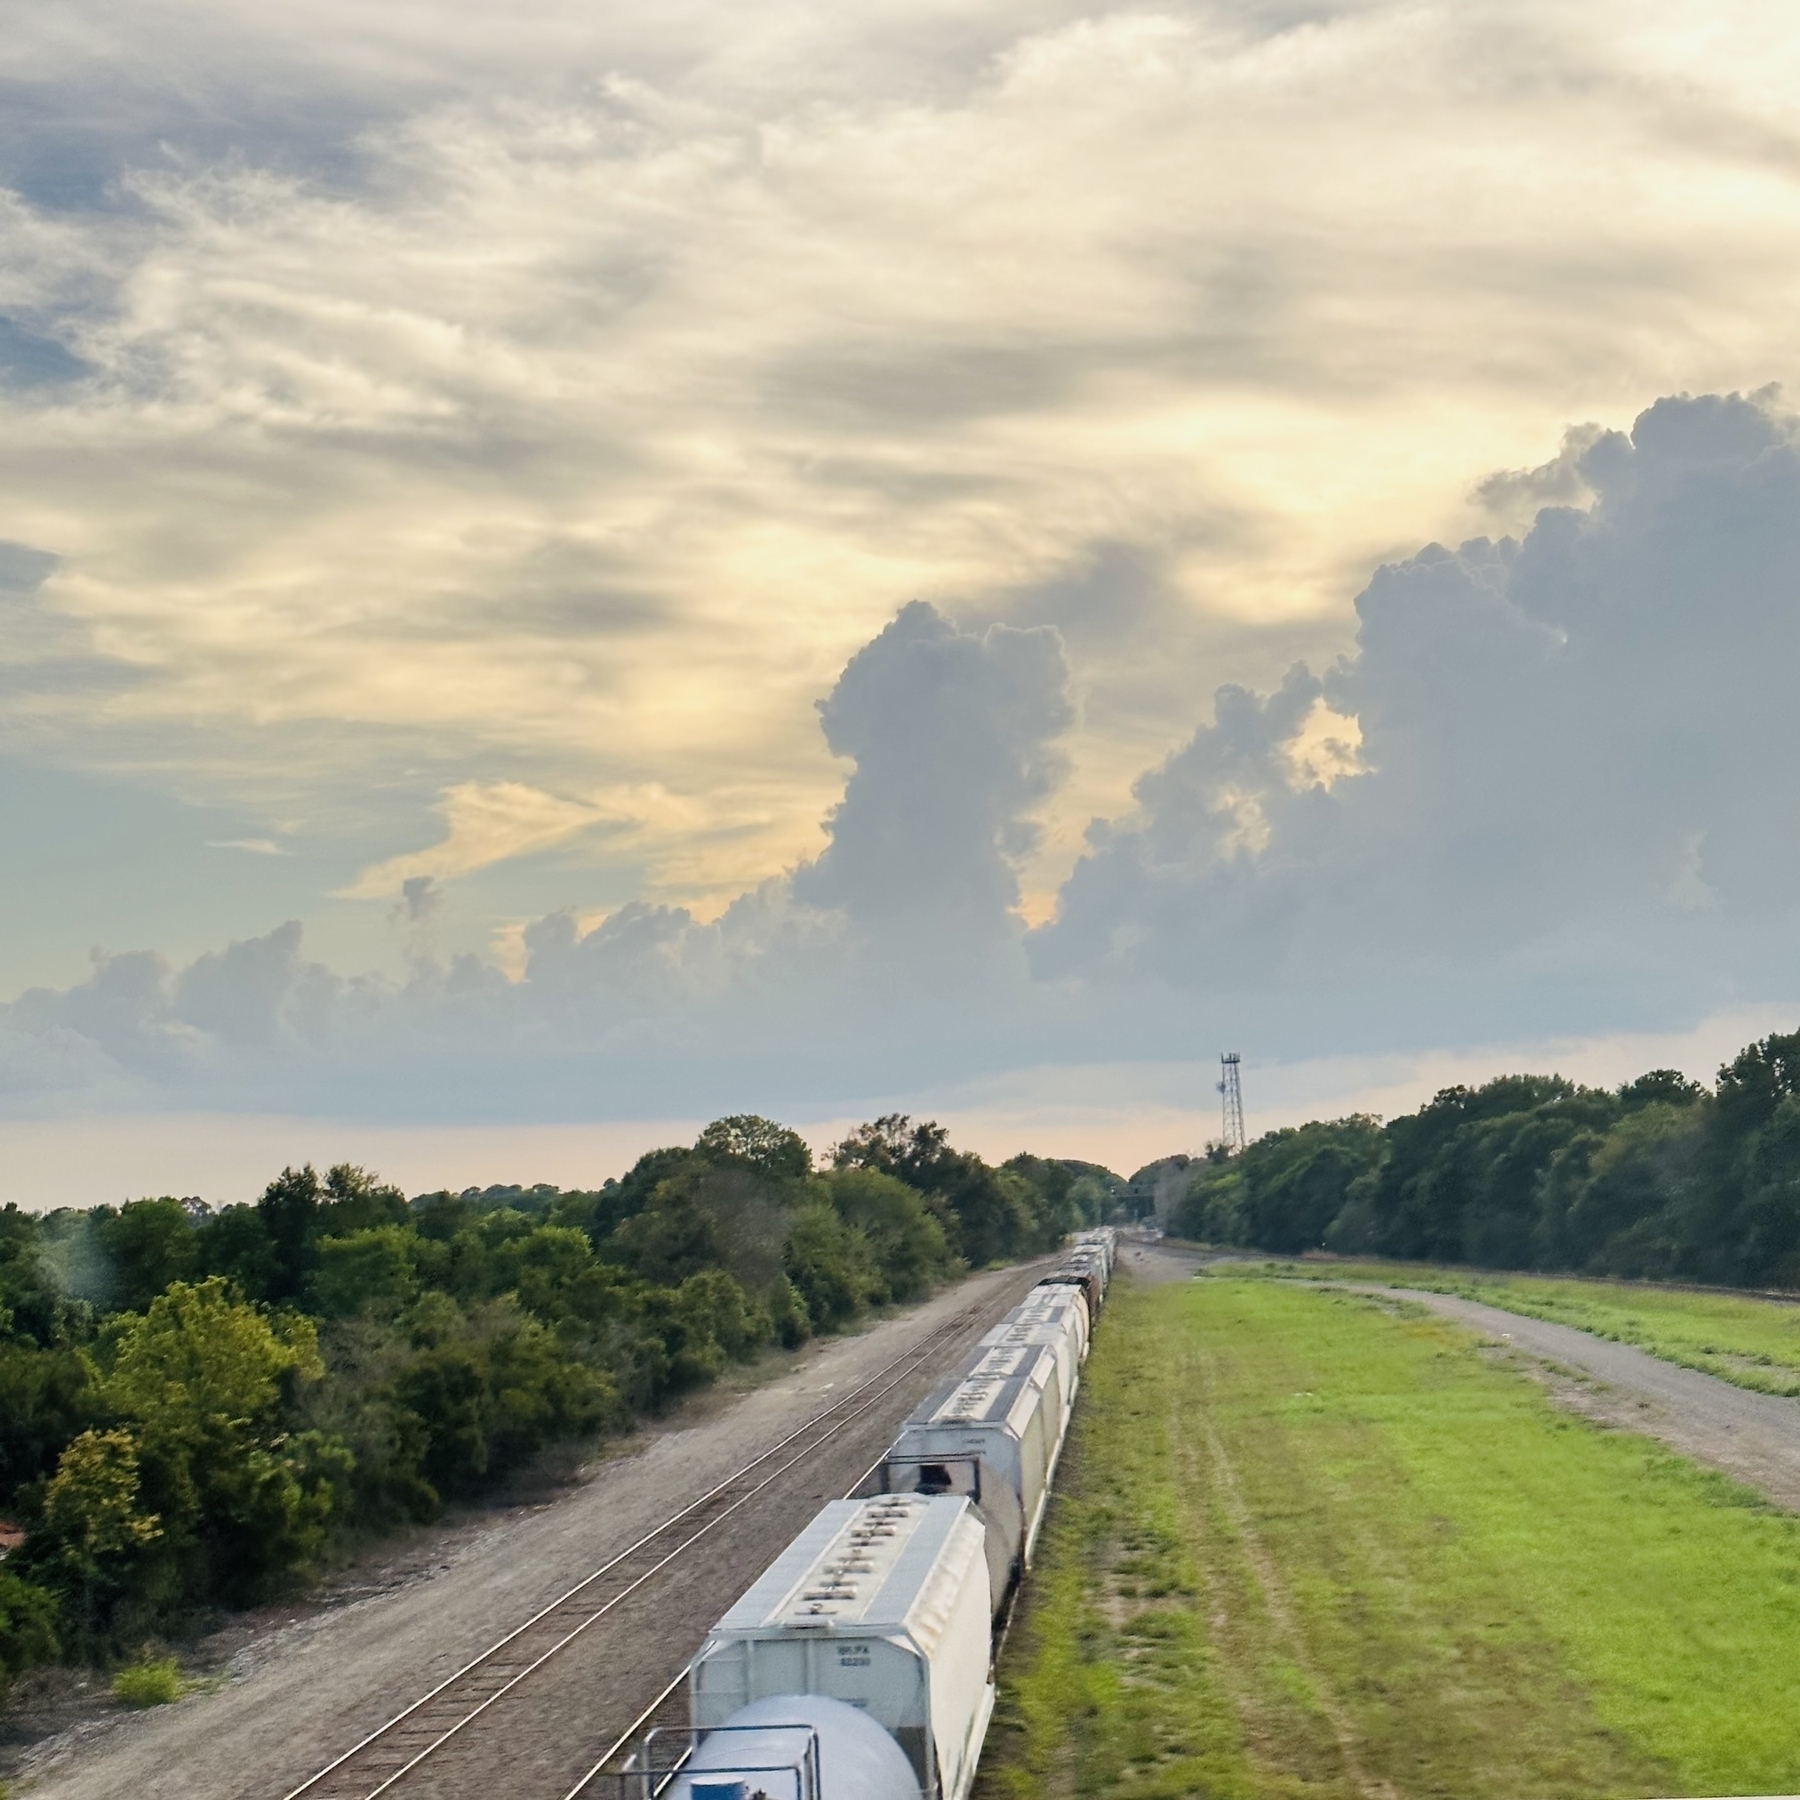 View from an overpass in Lafayette. Freight train on tracks and clouds before sunset.